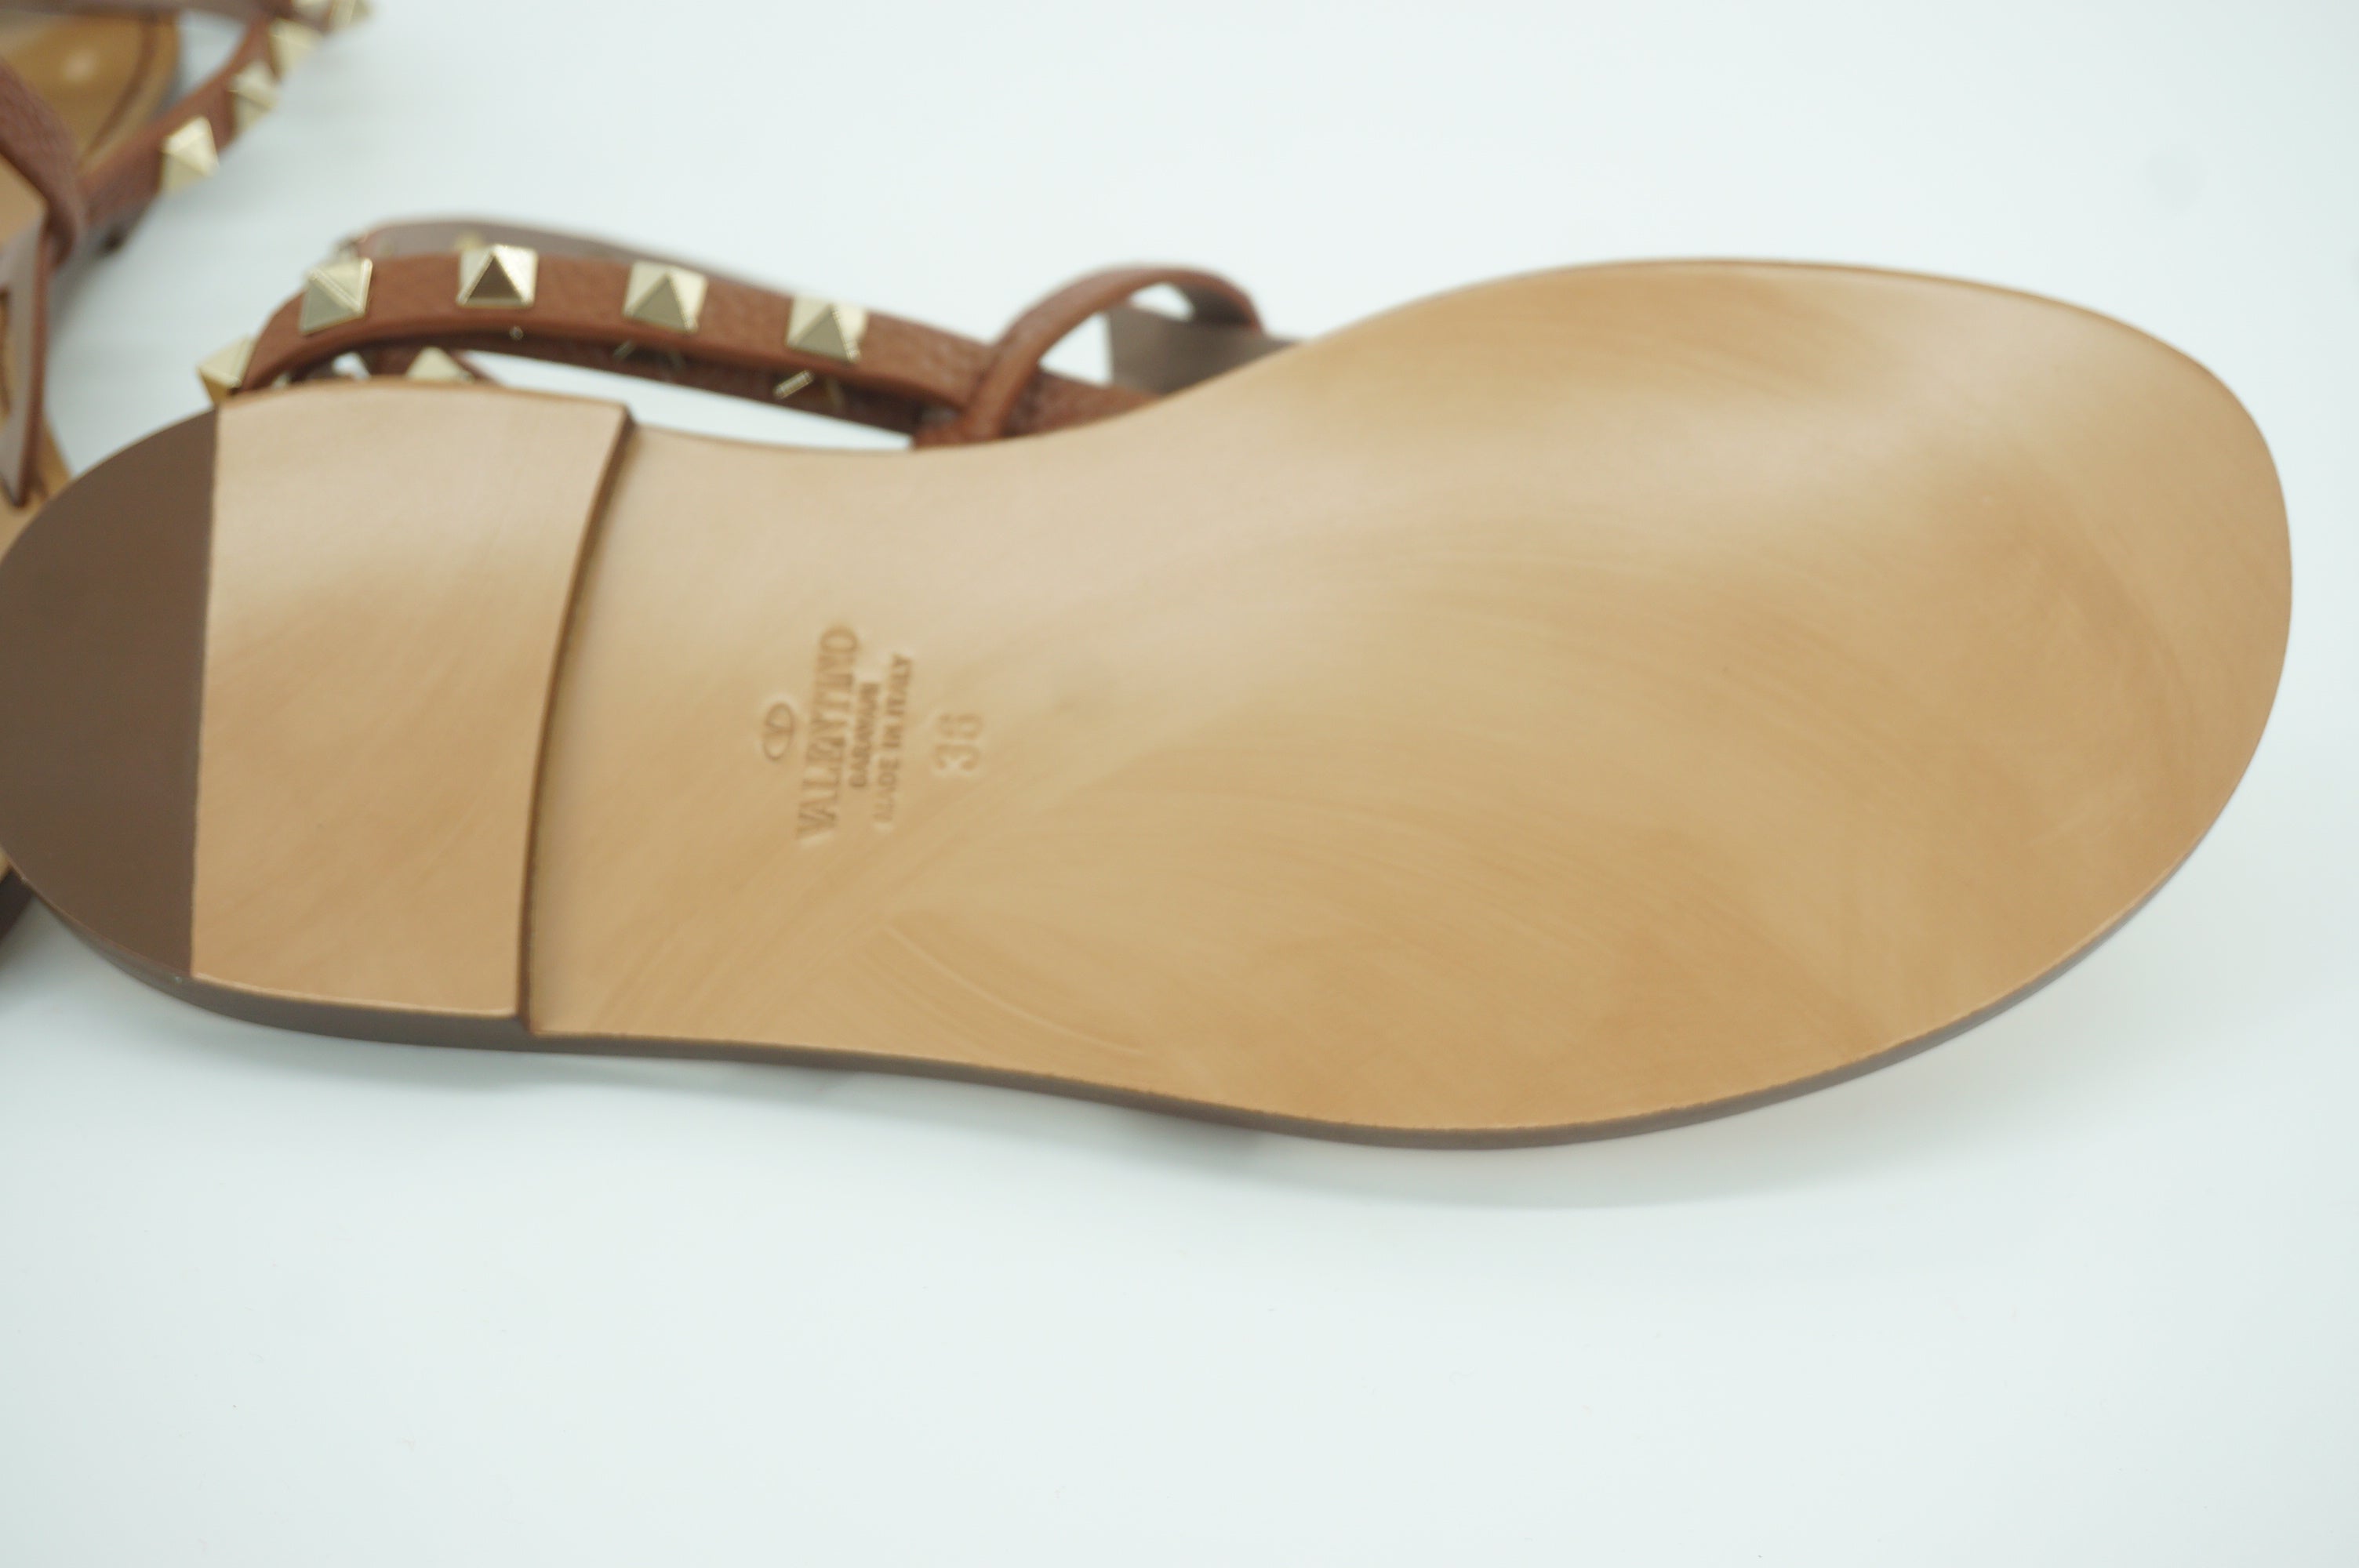 Valentino Rockstud brown Leather Ankle Strap Flat Thong Sandals Size 36 NIB $895